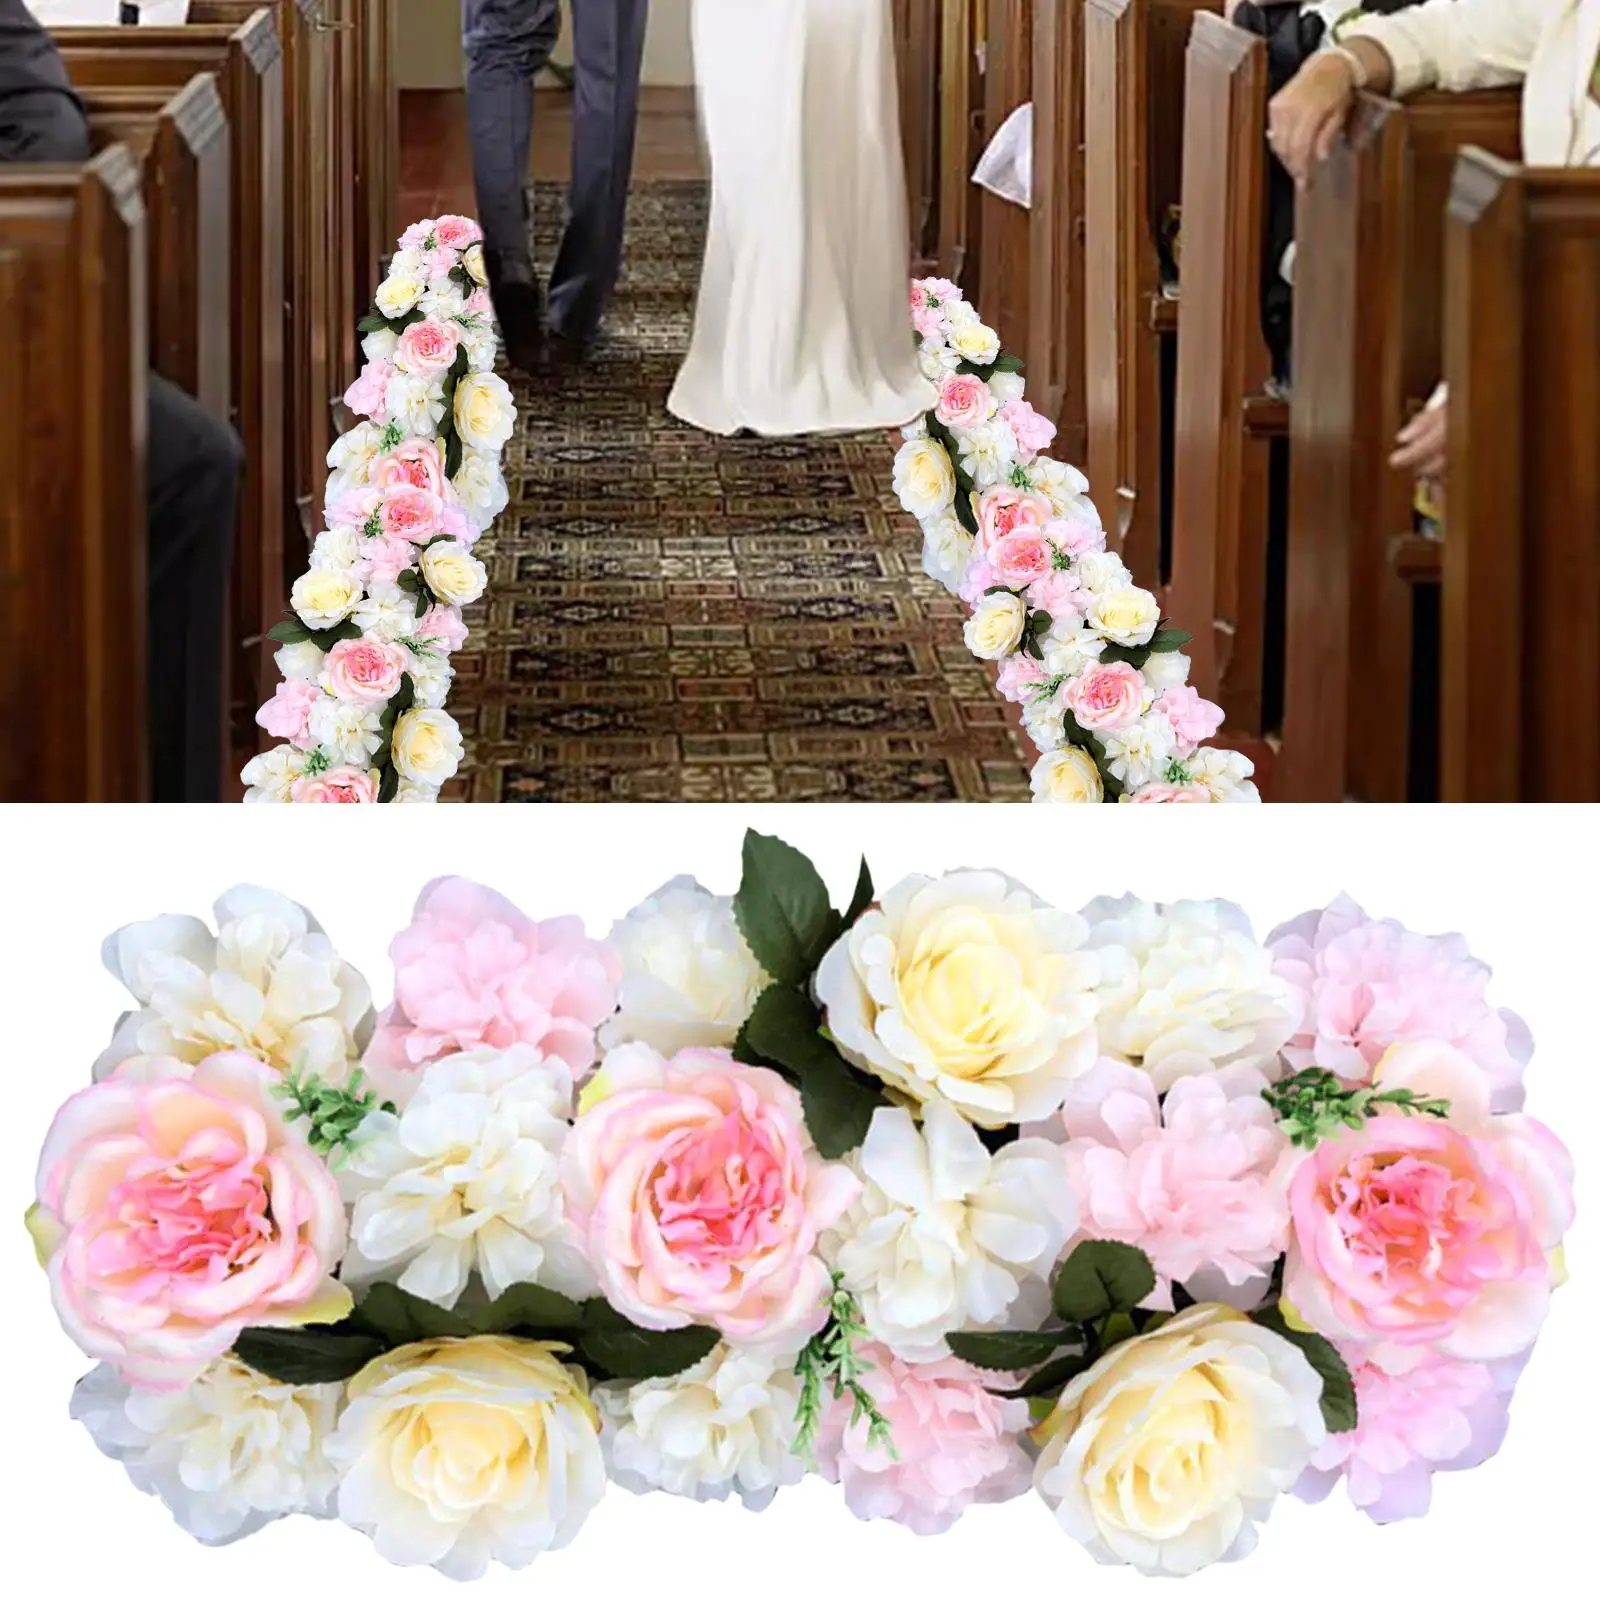 Artificial Flower Wall Backdrop DIY Arched Door Flower Row Wedding Road Cited Flowers Flowers Wall Panel for Party T Station